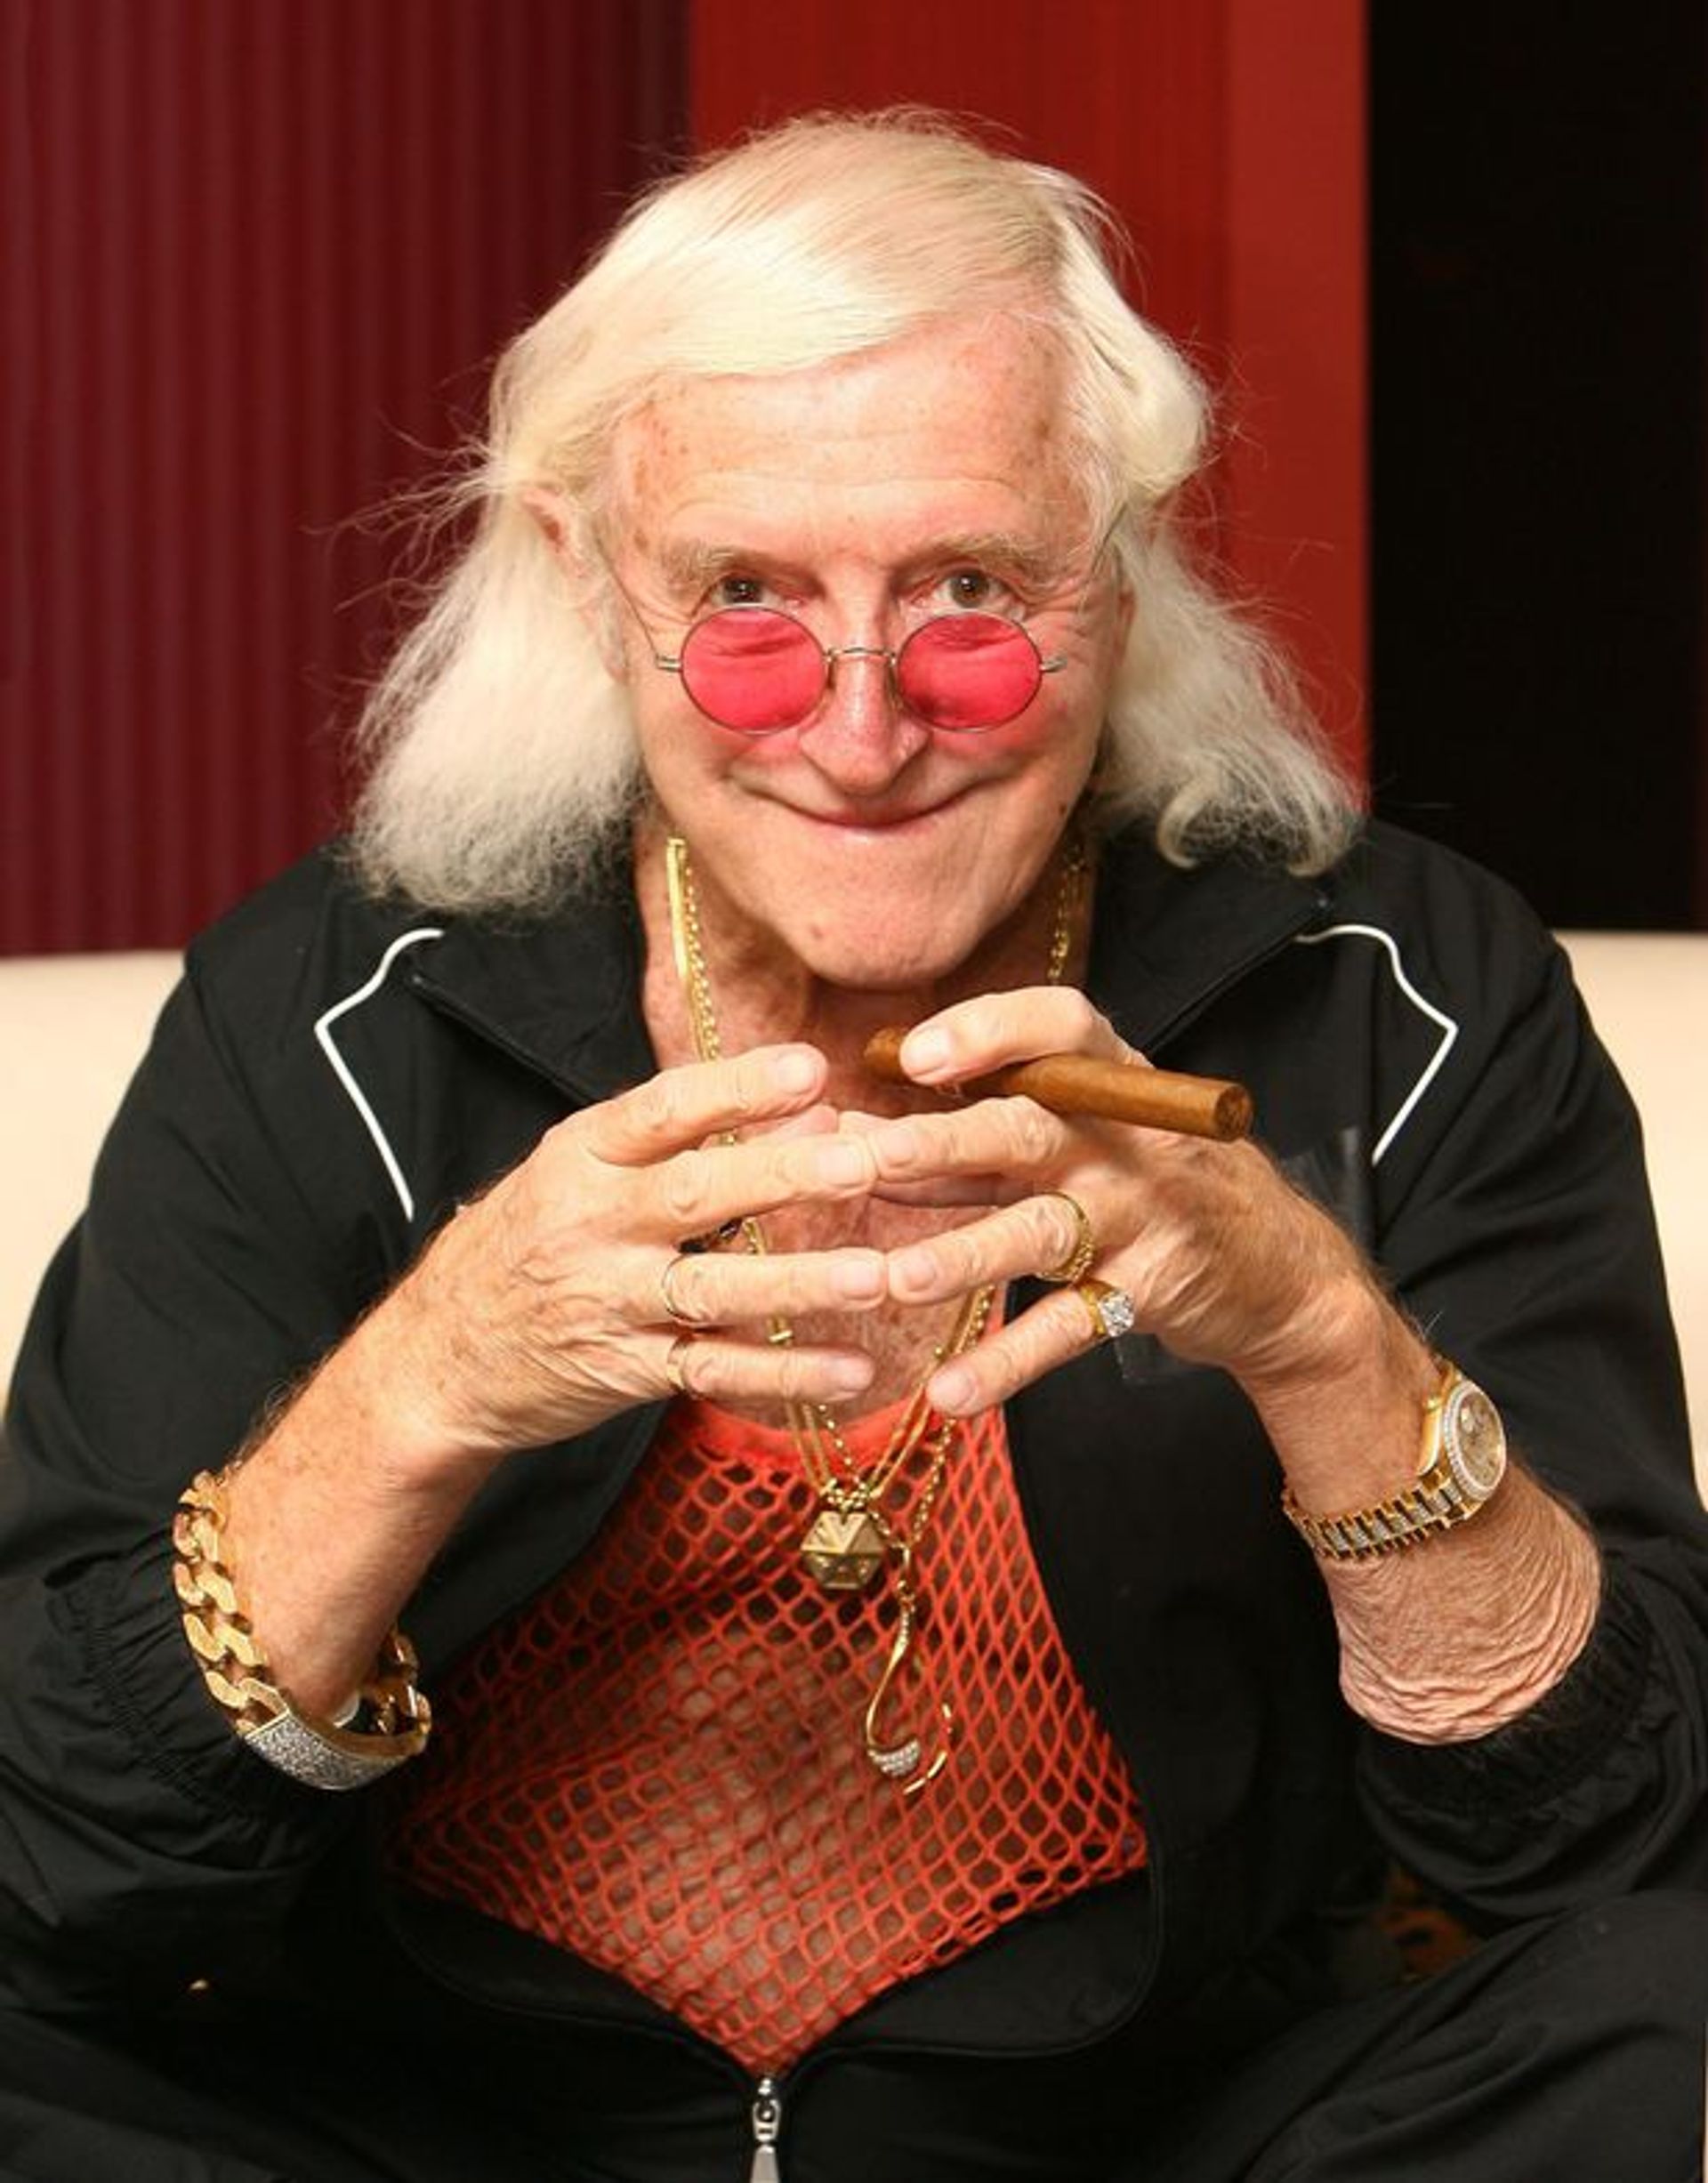 Jimmy Savile likely sexually assaulted up to 500 people during his lifetime, including children as young as eight. Photo: SWNS.com